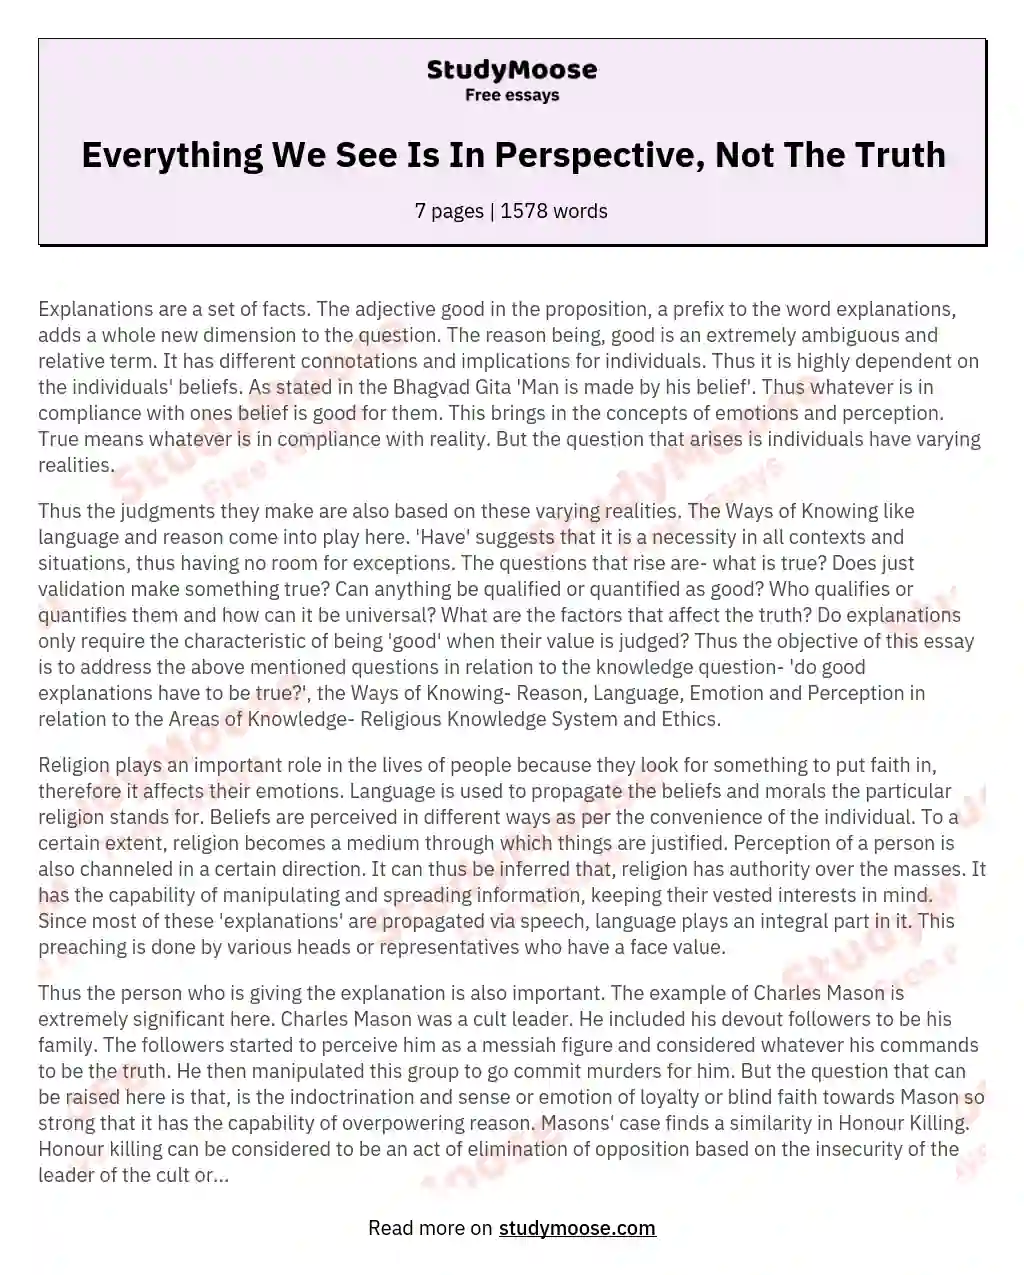 Everything We See Is In Perspective, Not The Truth essay